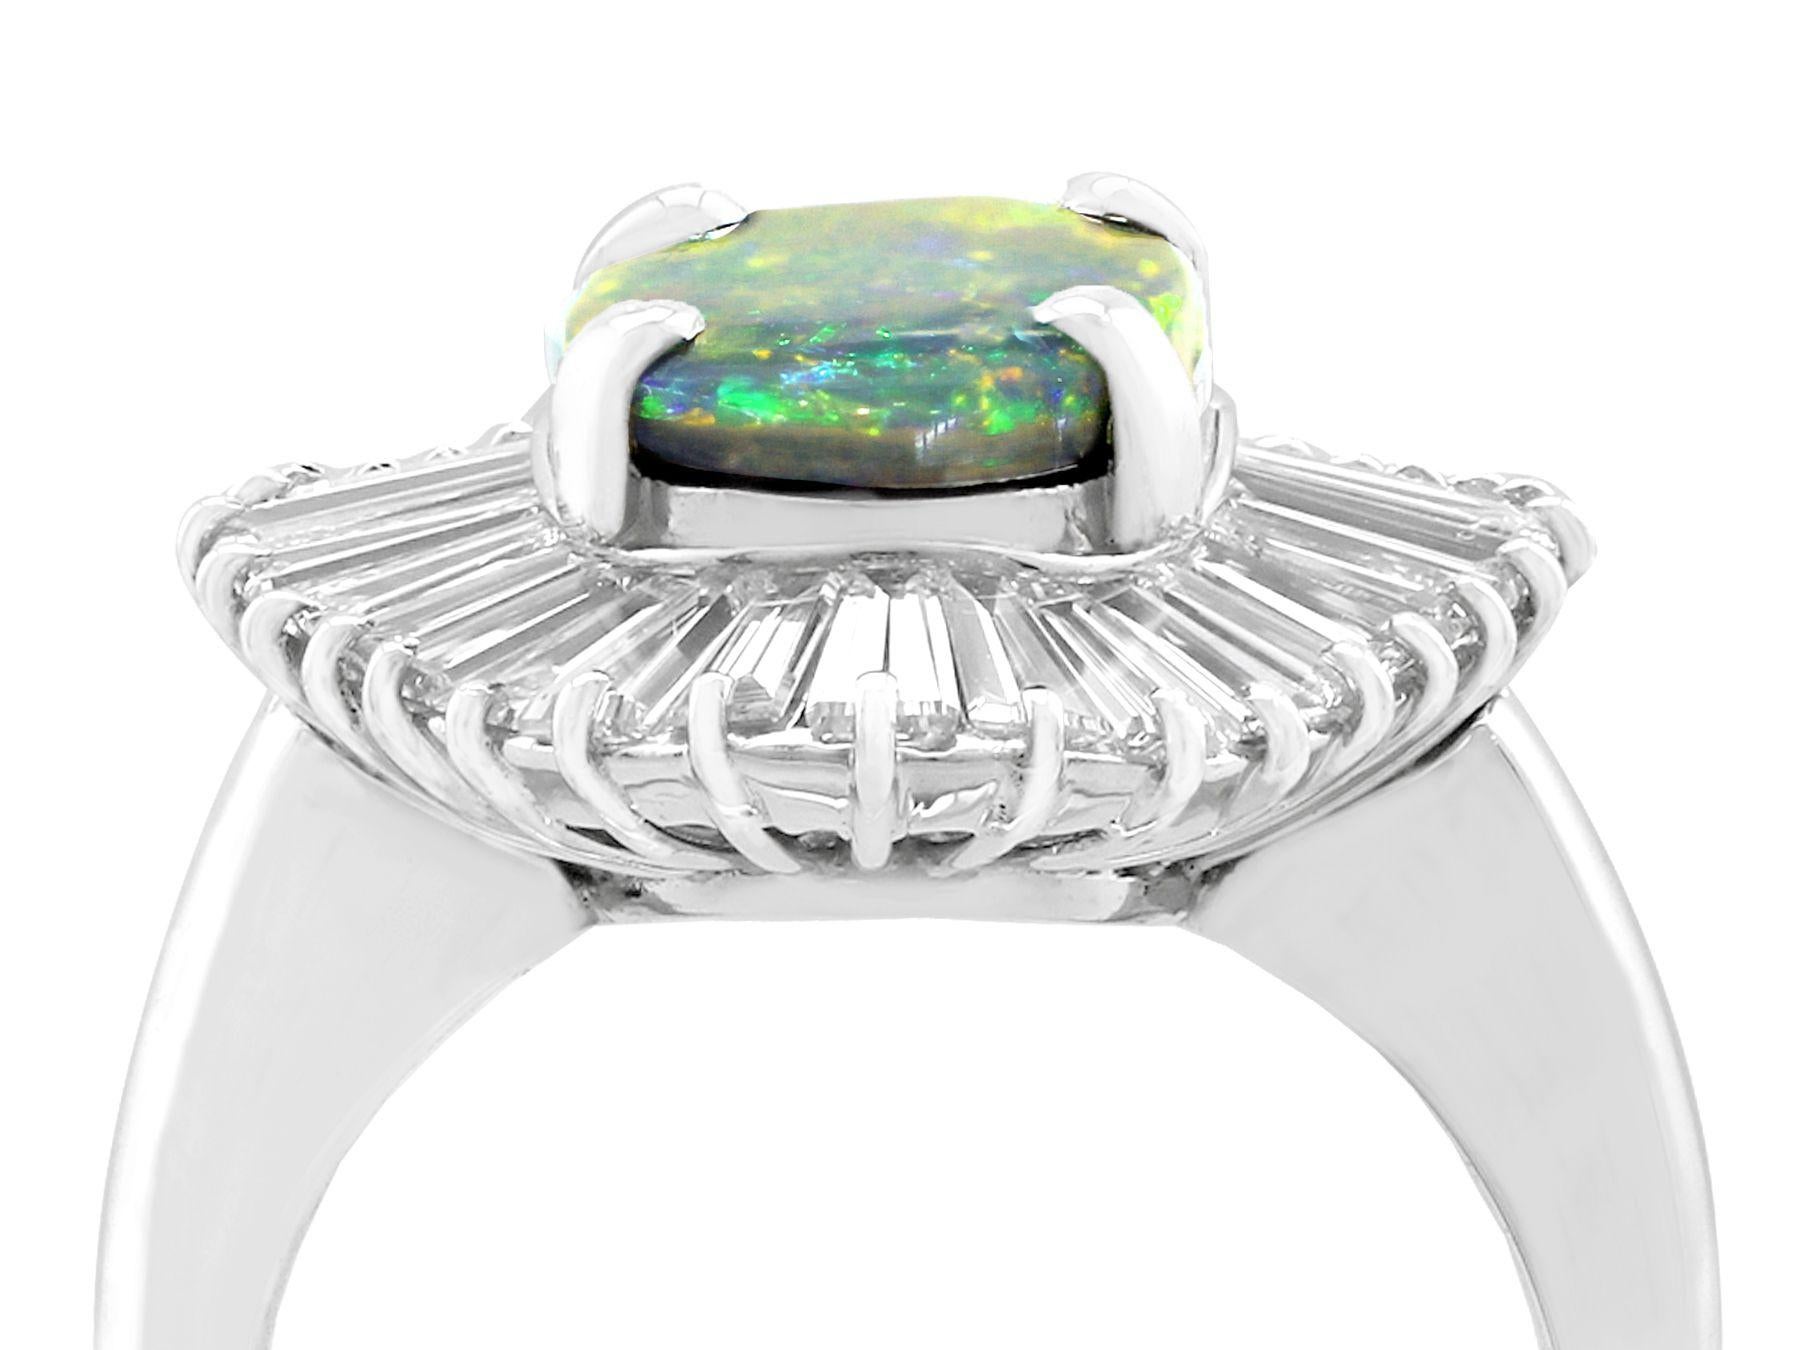 A stunning contemporary 1.86 carat opal and 3.22 carat diamond, platinum dress ring; part of our diverse opal estate jewelry collections.

This stunning, fine and impressive opal and diamond cluster ring has been crafted in platinum.

The